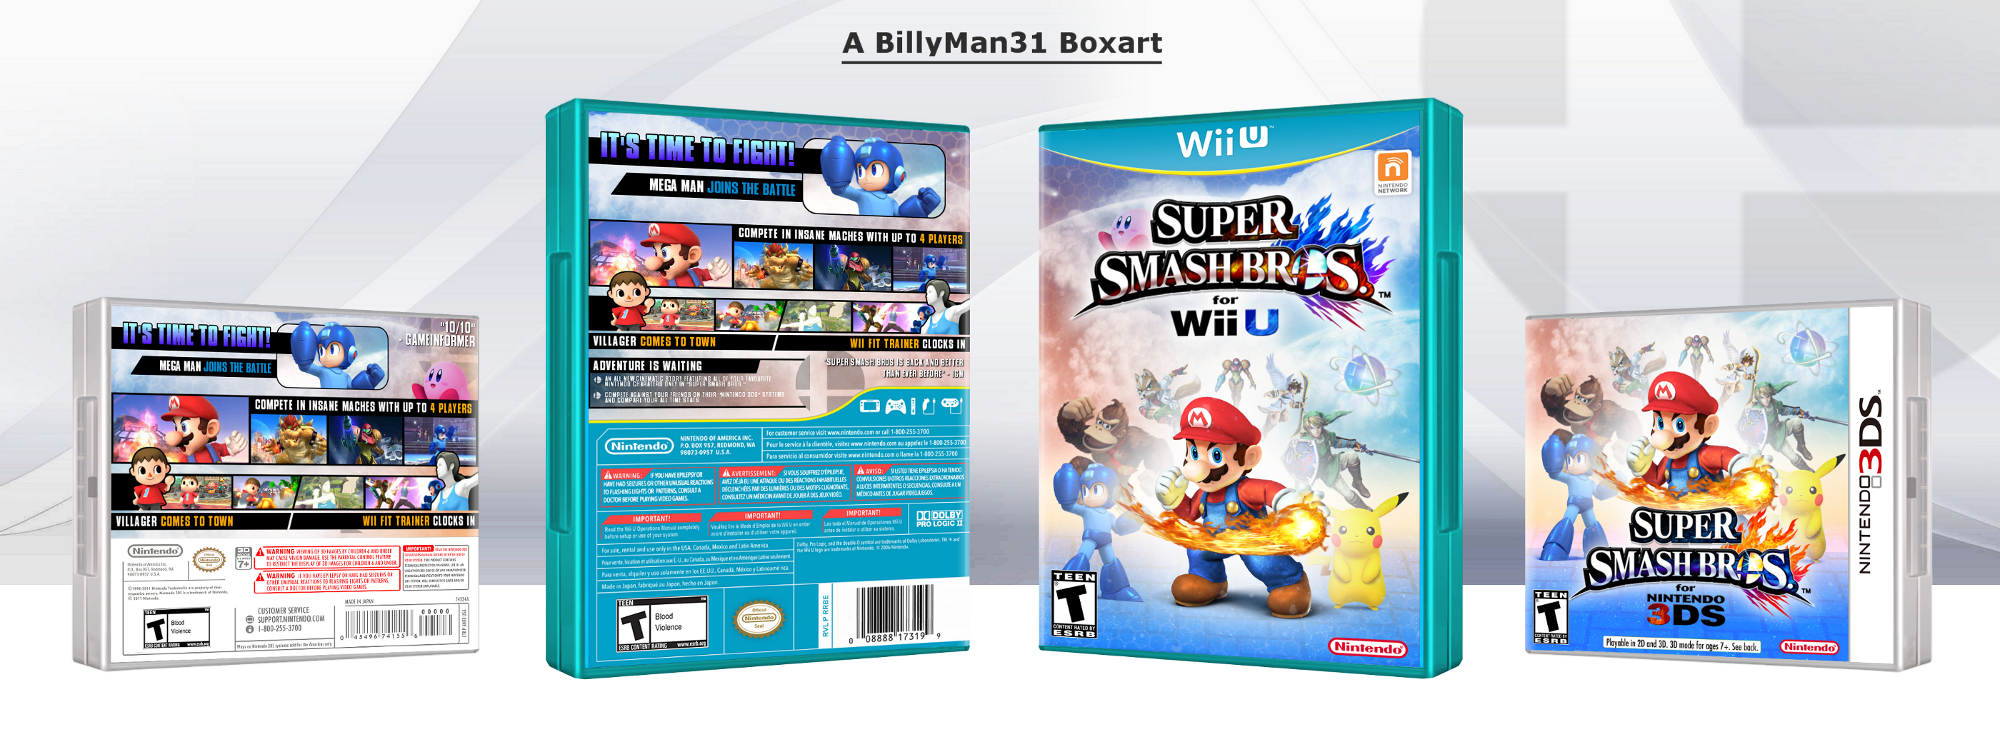 Super Smash Bros for Wii U and 3DS box cover